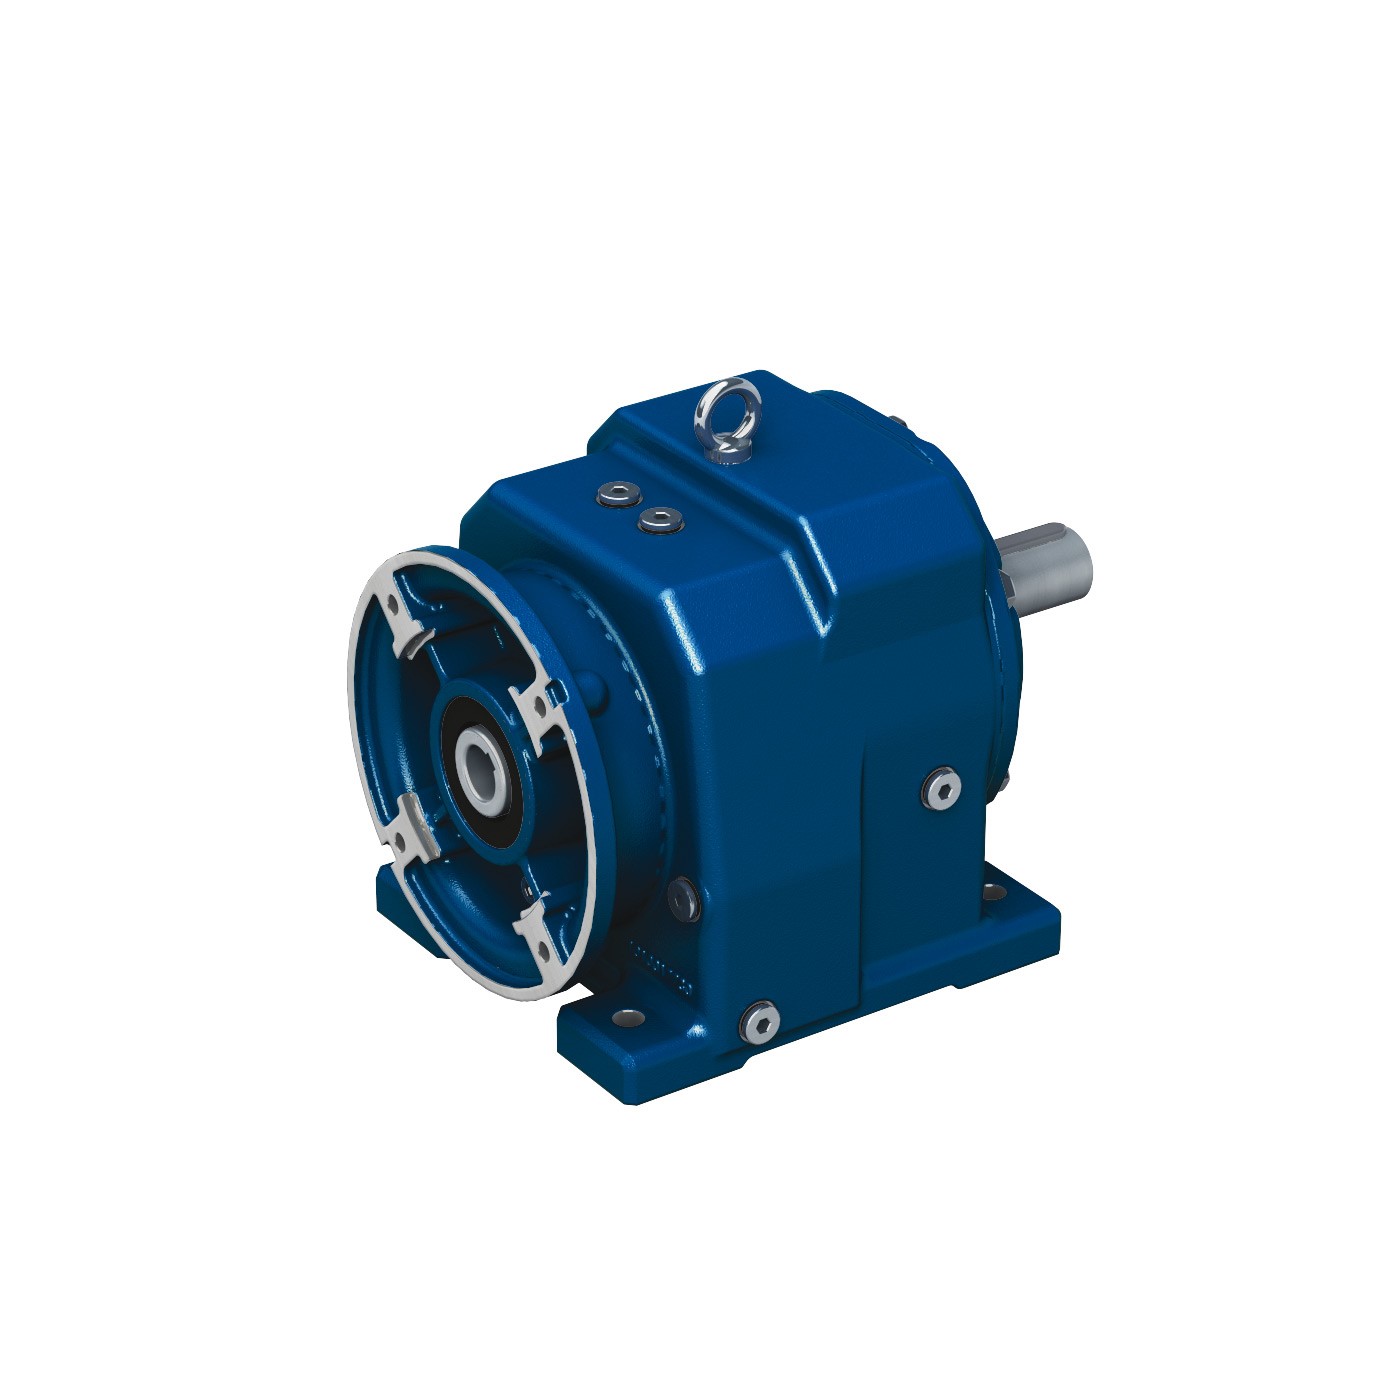 STM NEW INLINE GEARBOXES A SERIES